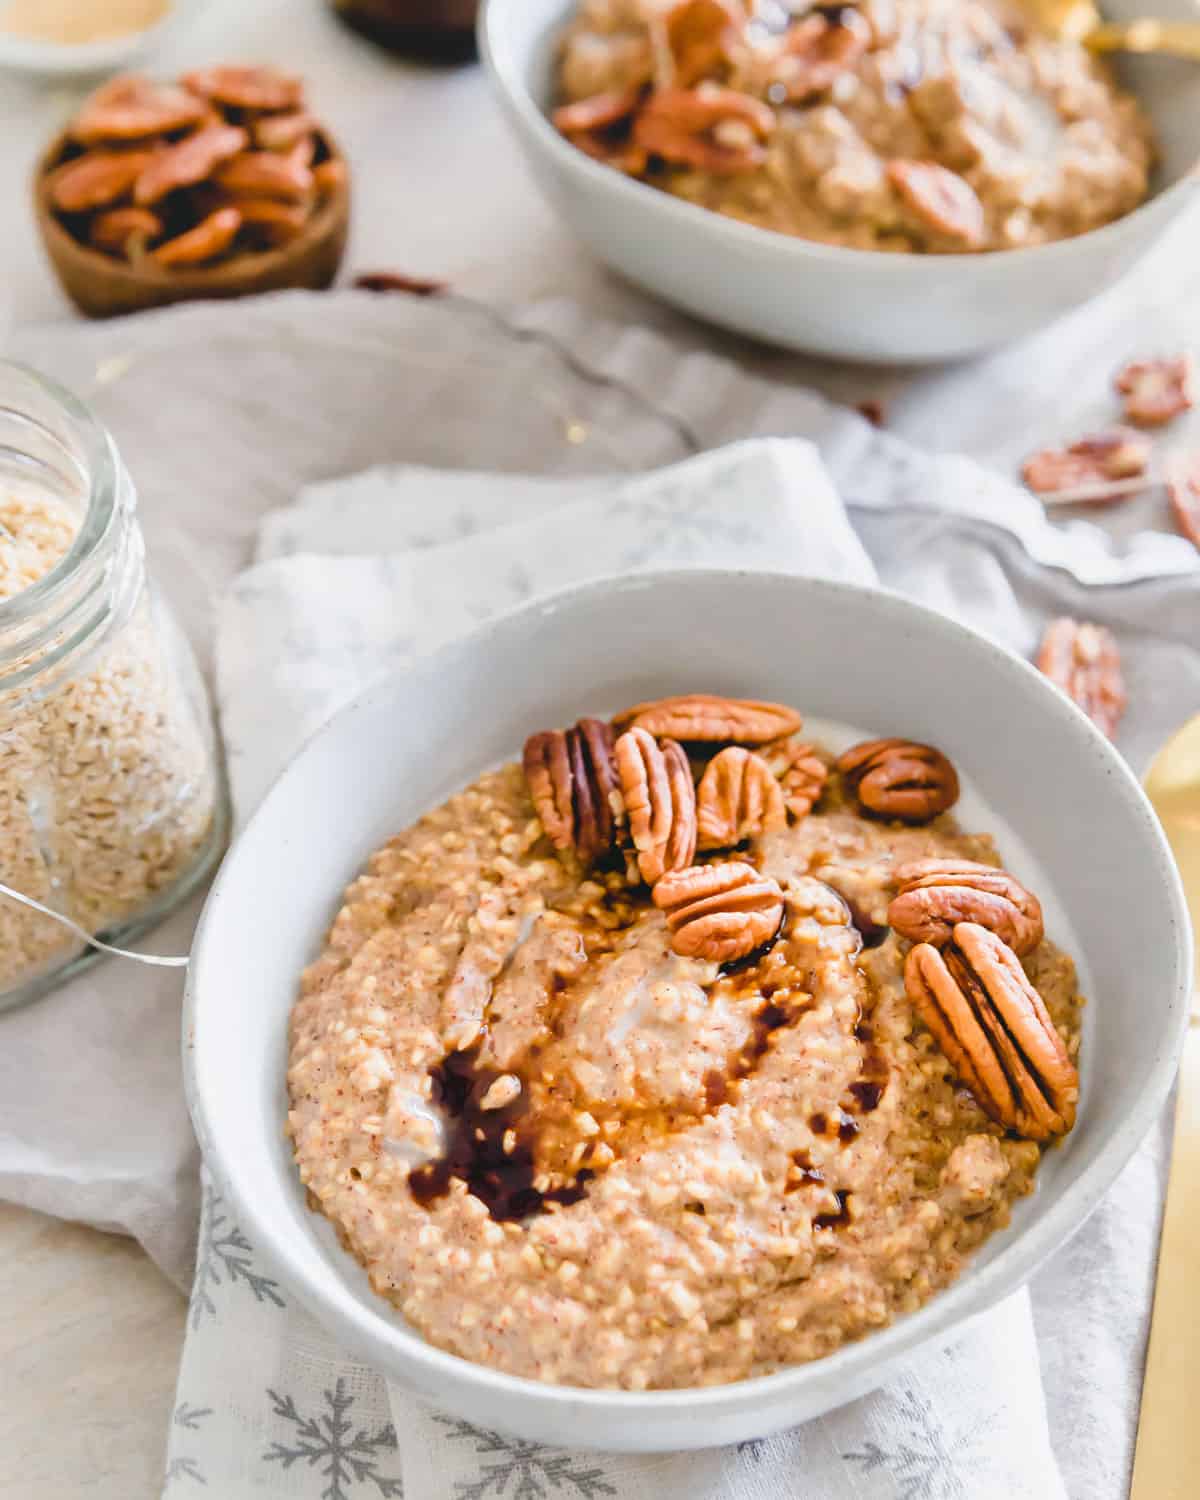 This gingerbread oatmeal is made on the stove-top using chewy steel oats, gingerbread spices and molasses for a true gingerbread taste! 